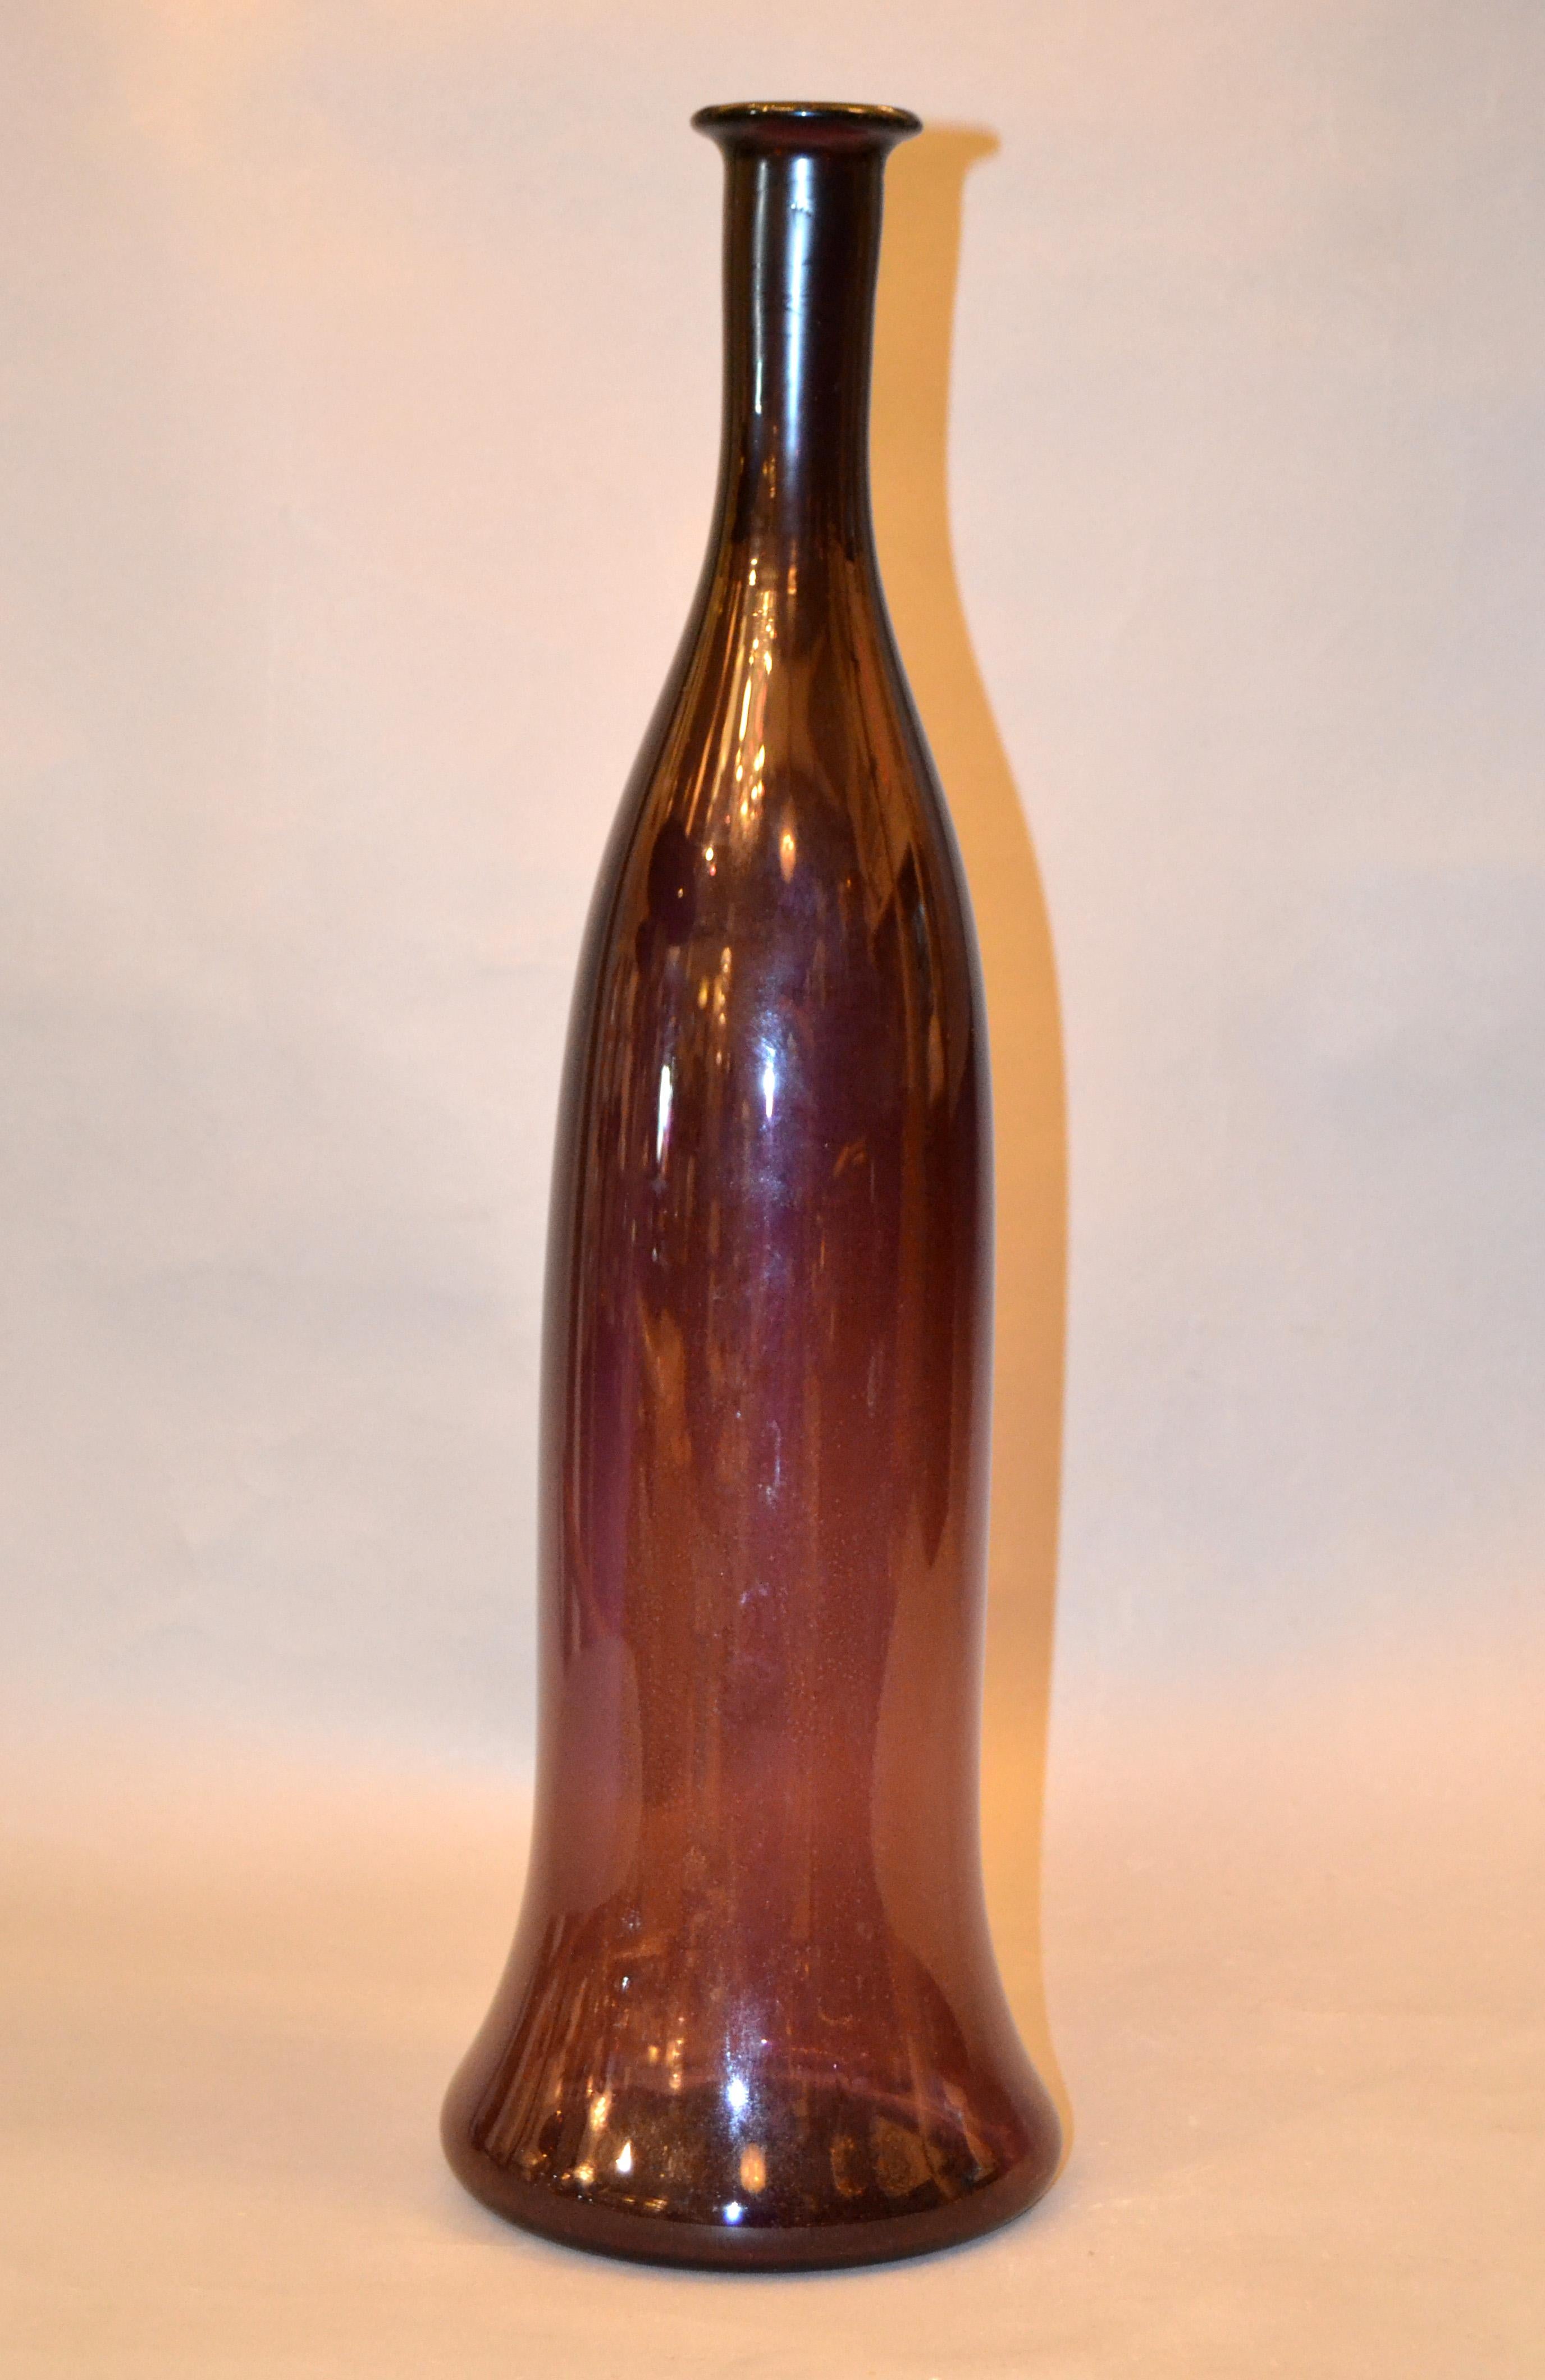 Mid-Century Modern tall blown glass vase, vessel, decanter in translucent amethyst purple.
Amethyst purple is a shade that captivates the imagination and inspires.
This vase is perfect for your home or family gathering.